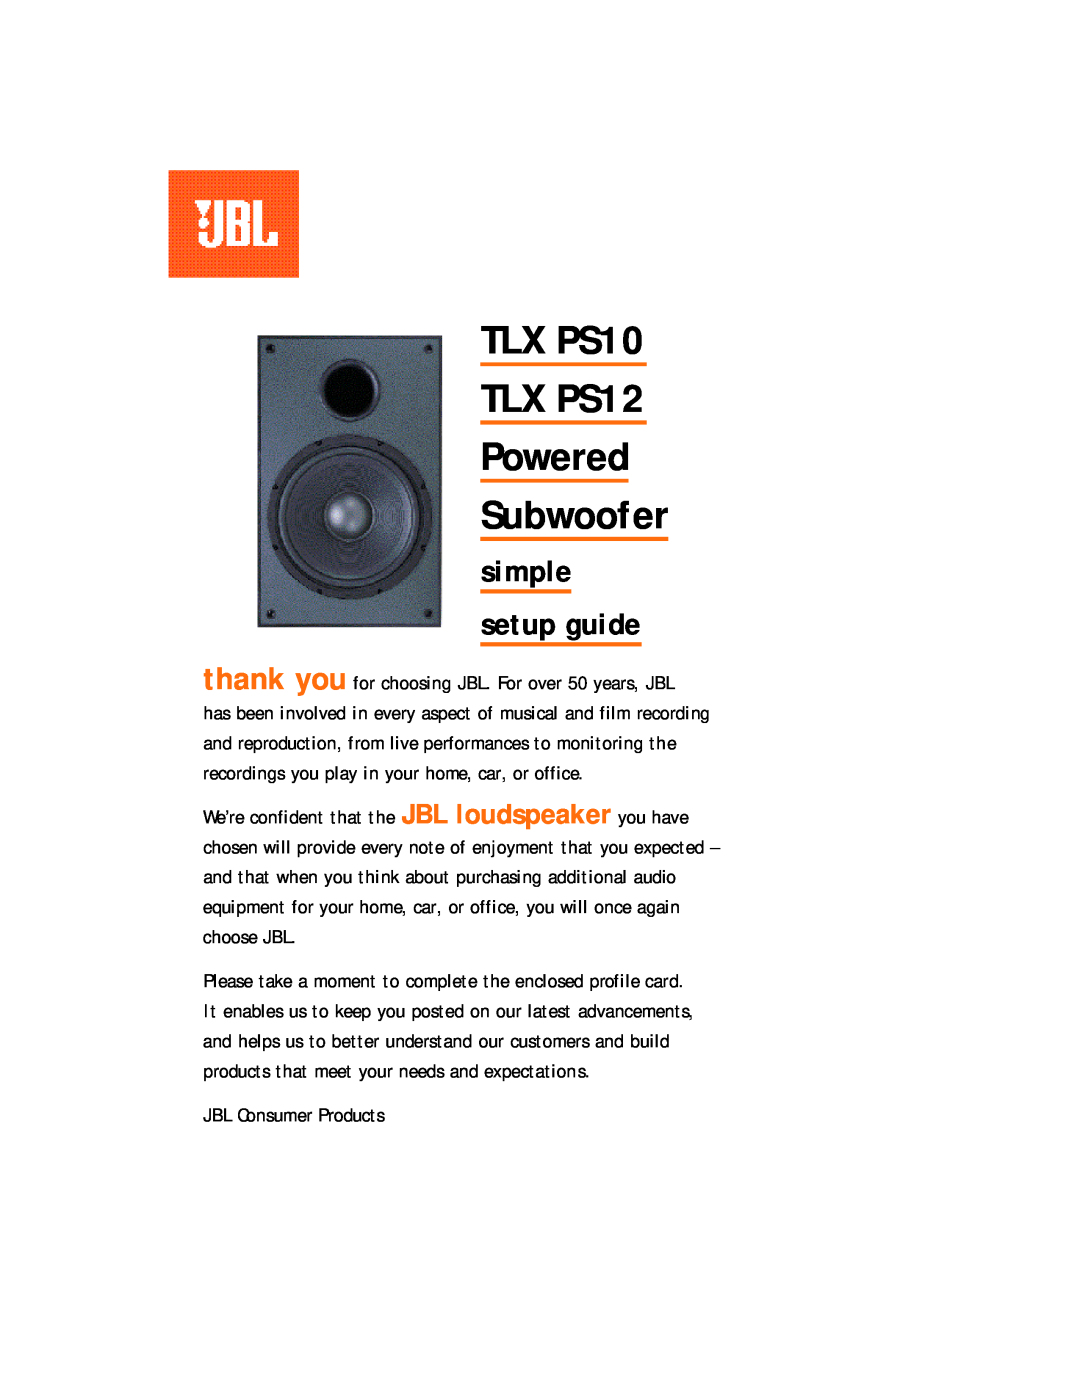 JBL setup guide TLX PS10 TLX PS12 Powered Subwoofer, simple setup guide 